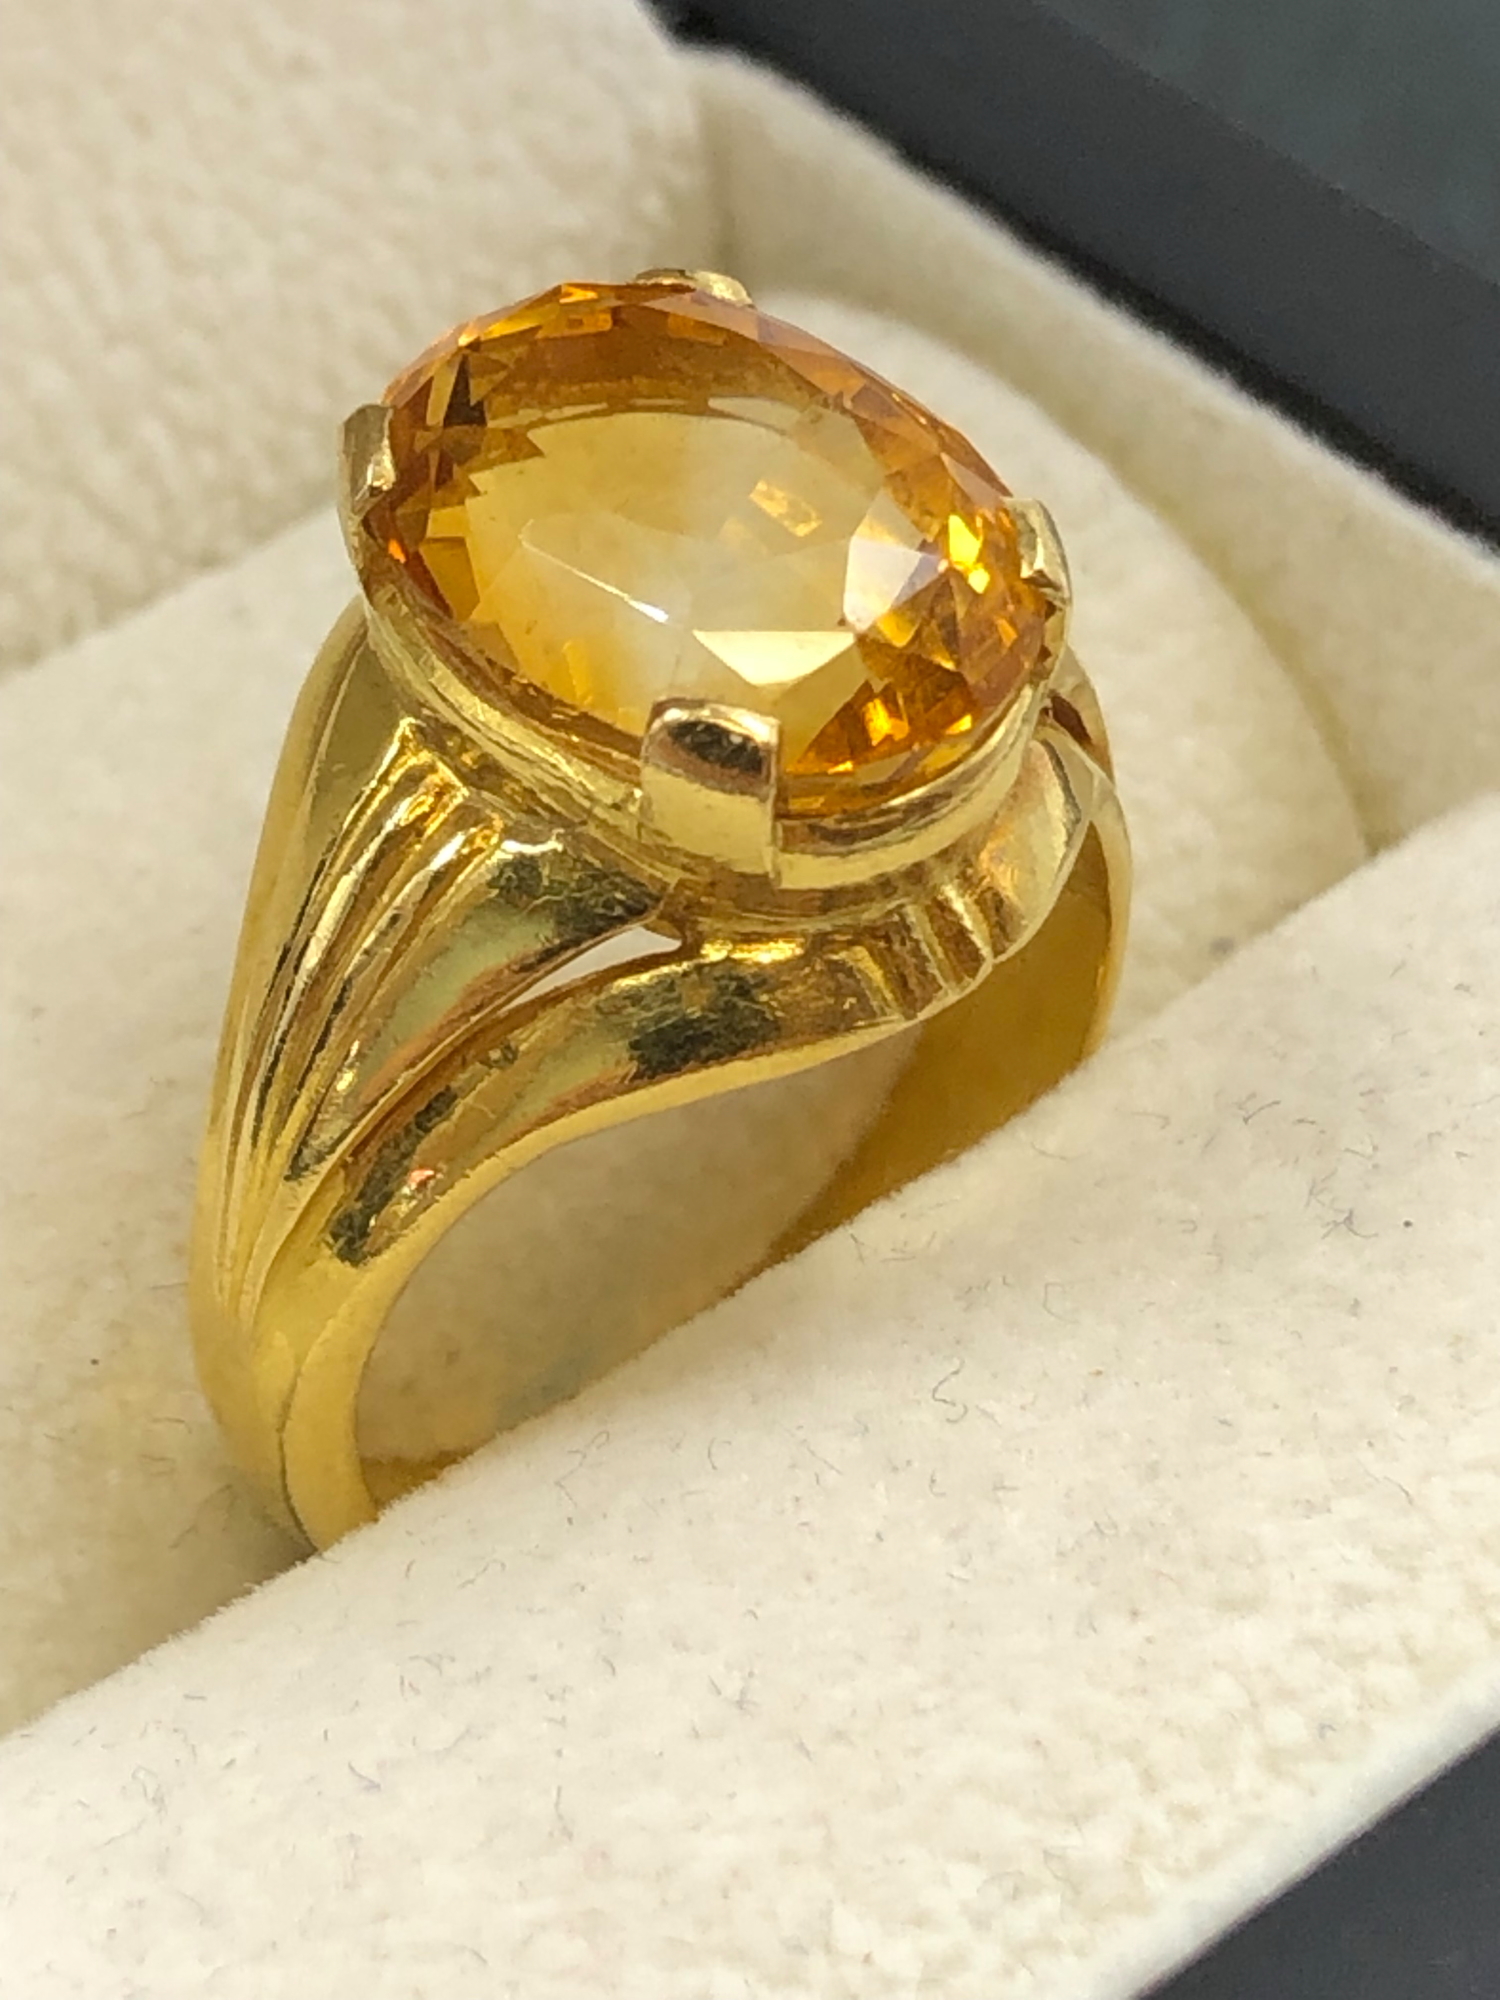 A FINE CITRINE SINGLE STONE RING. THE OVAL CUT STONE IN A RAISED FOUR CLAW SETTING. NO ASSAY - Image 4 of 4